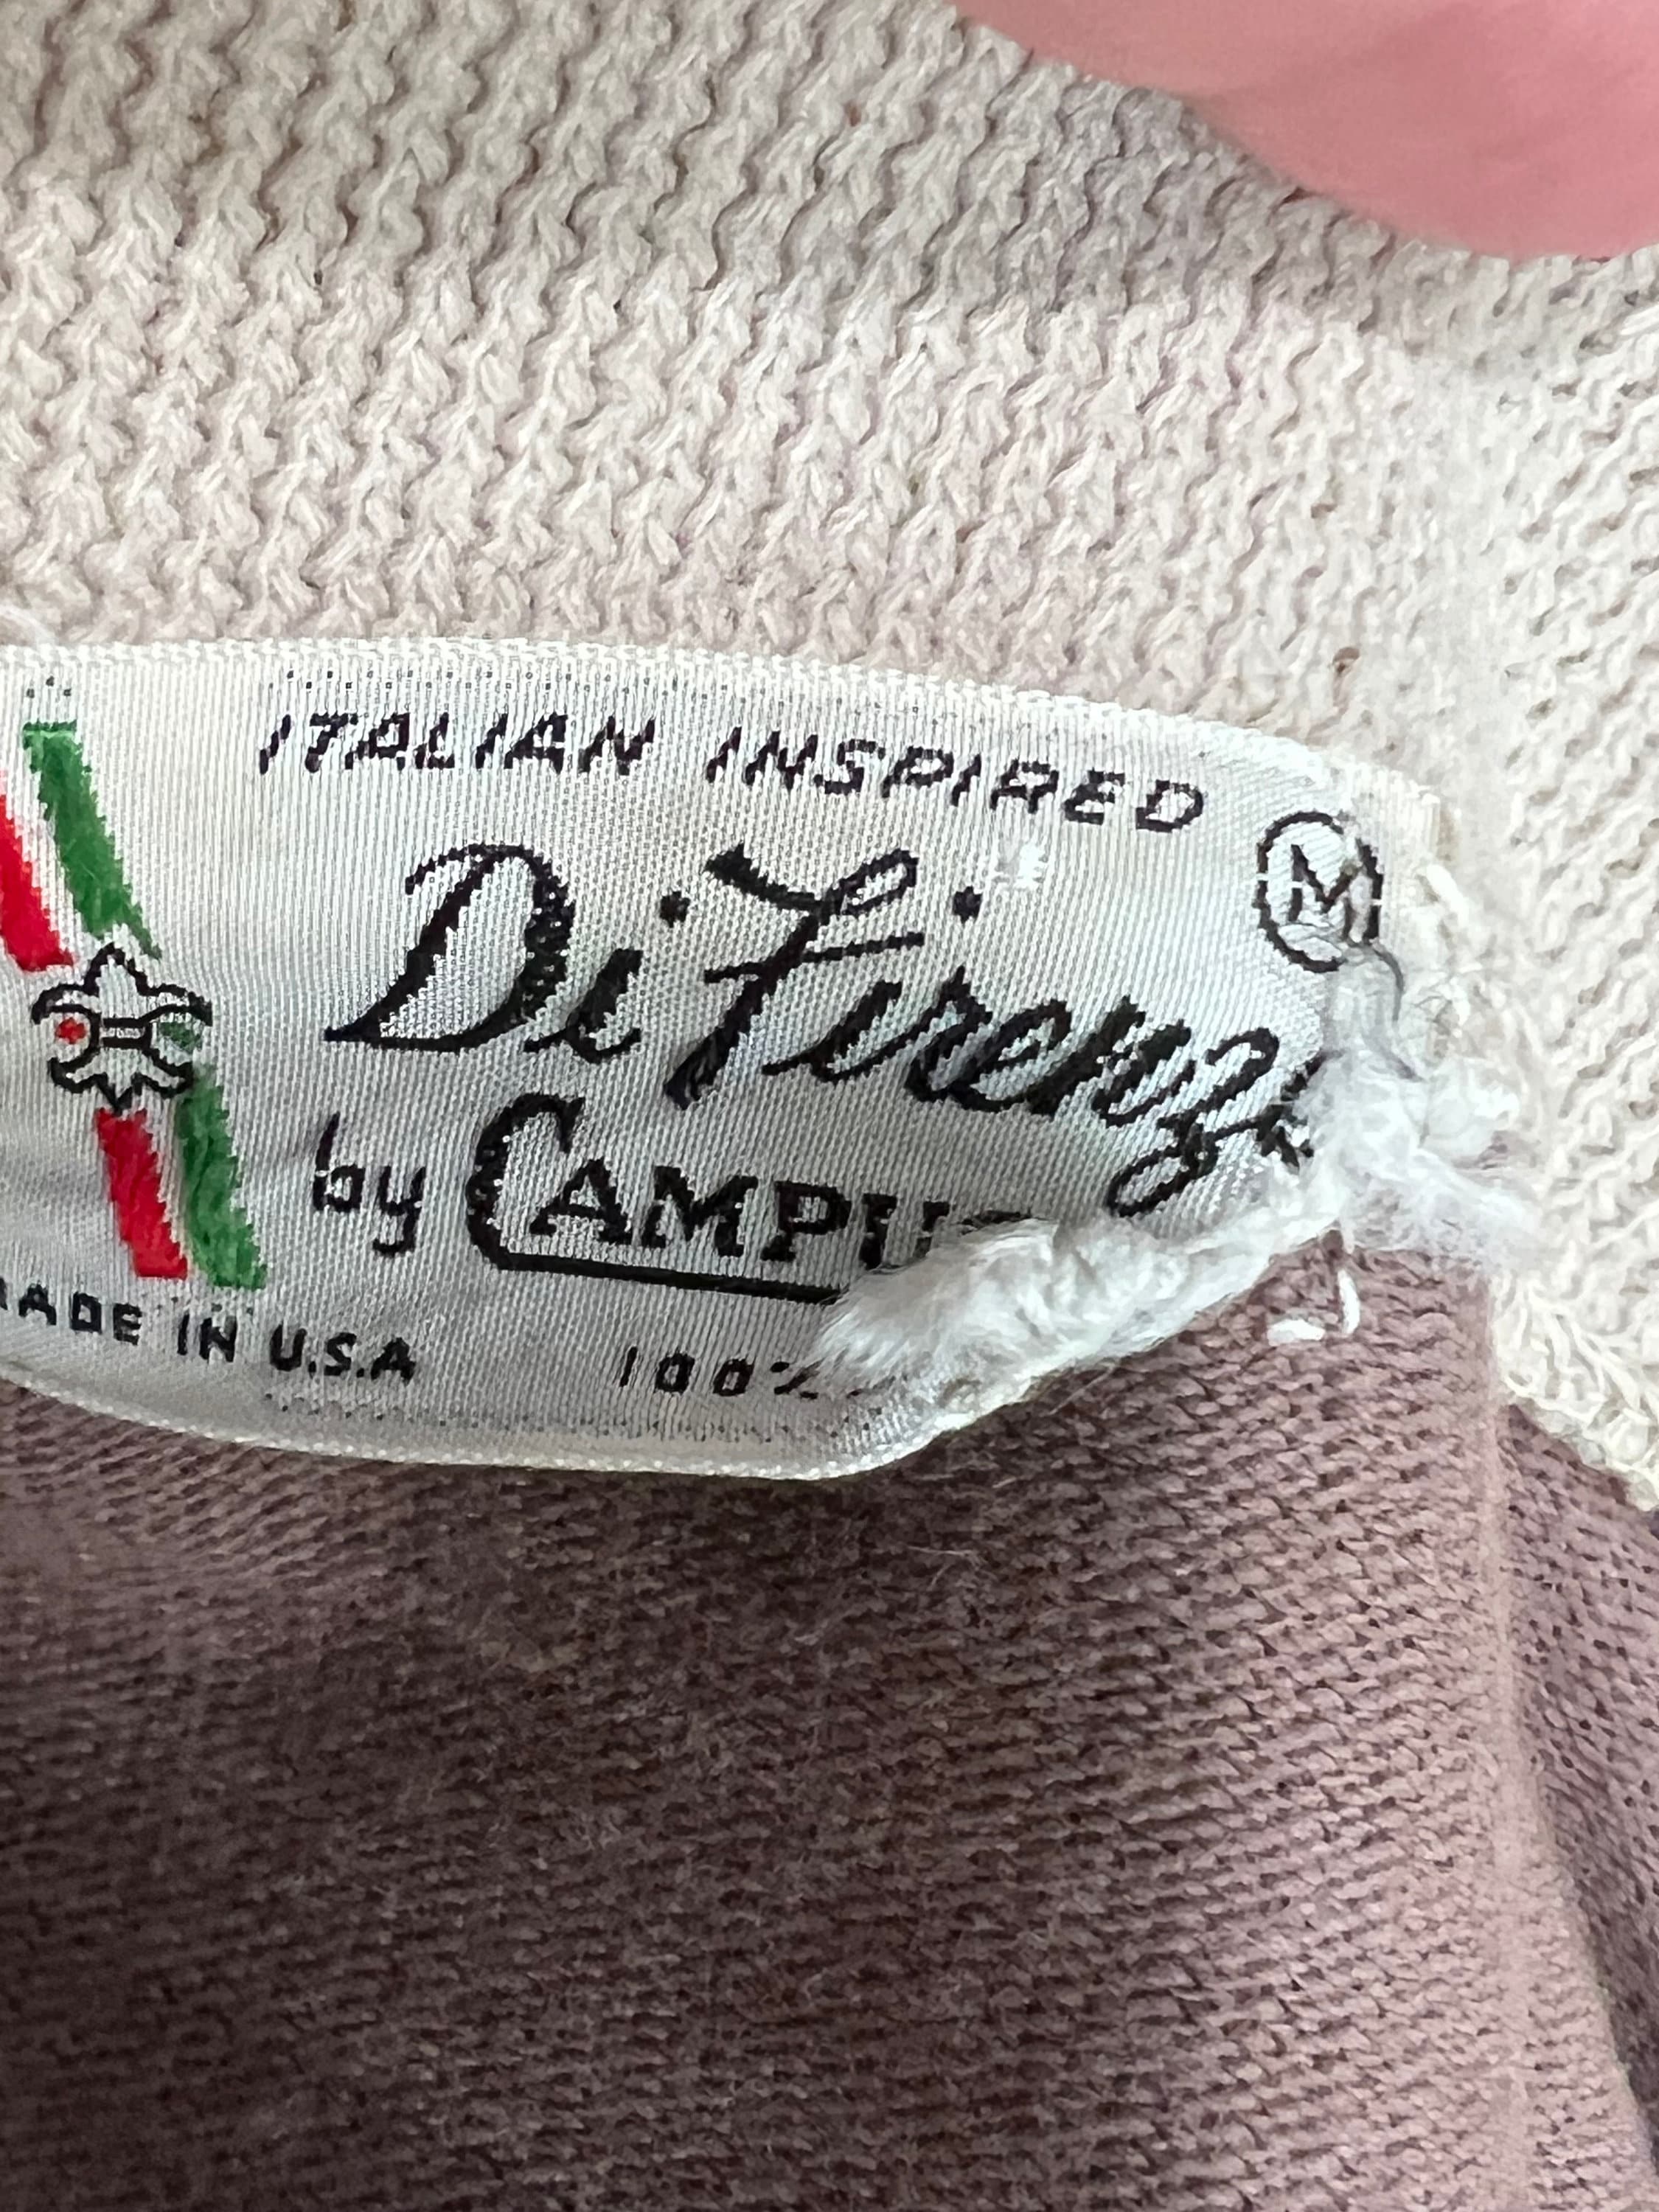 1960's Men's Italian Stlye Knit Shirt by Di Firenze by Campus, Size M 